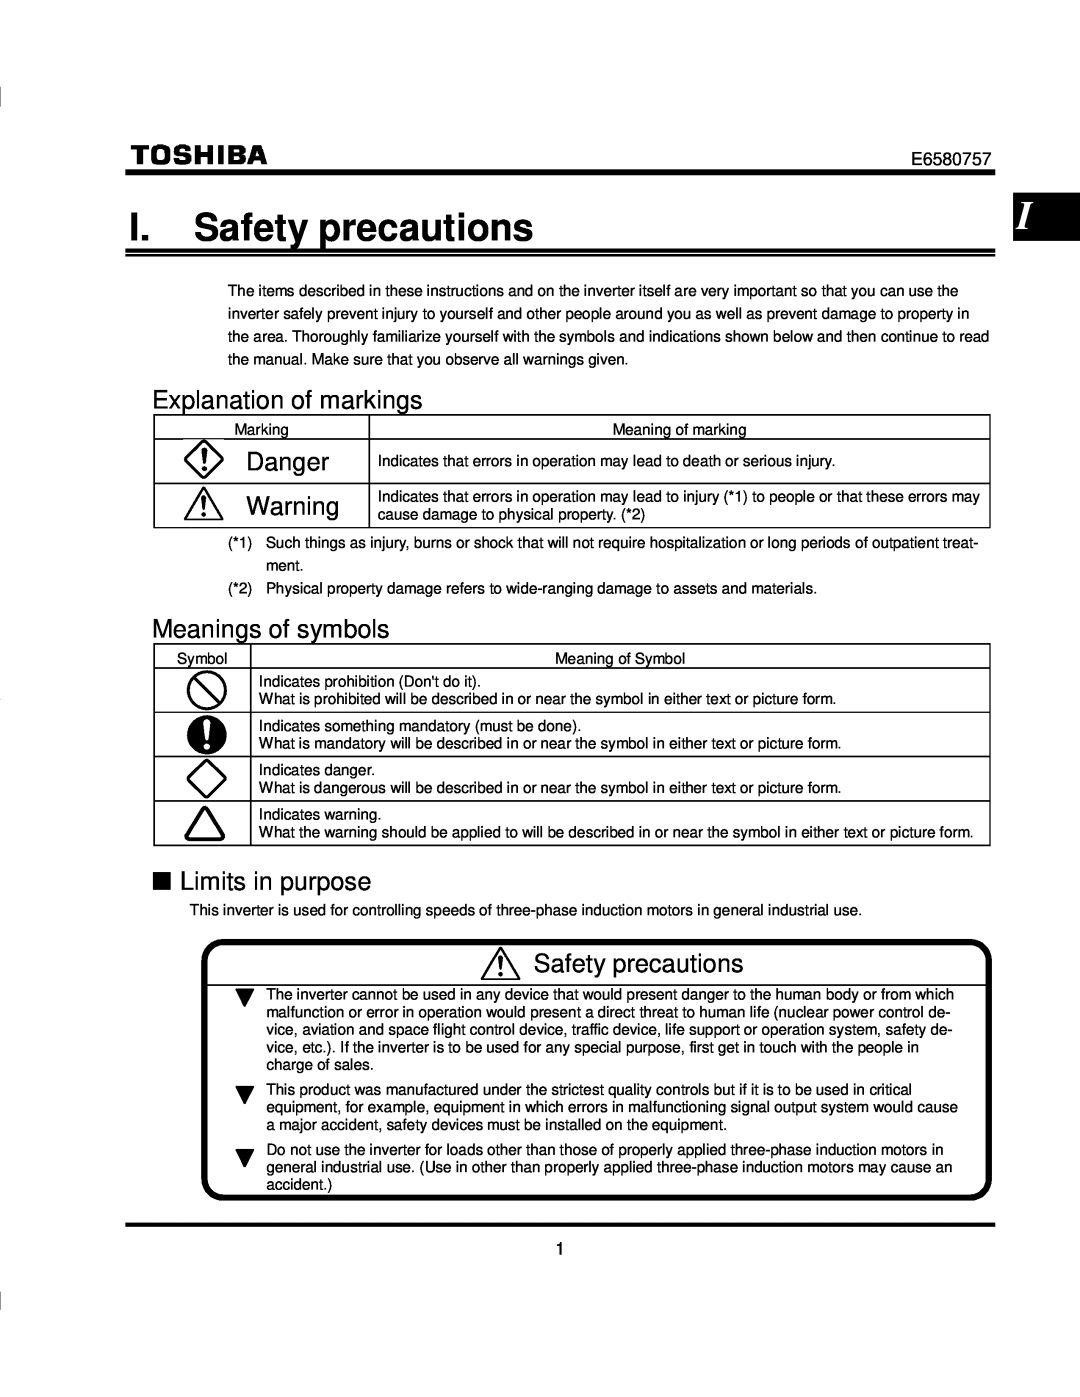 Toshiba VF-S9 manual I. Safety precautions, Explanation of markings, Danger, Meanings of symbols, Limits in purpose 